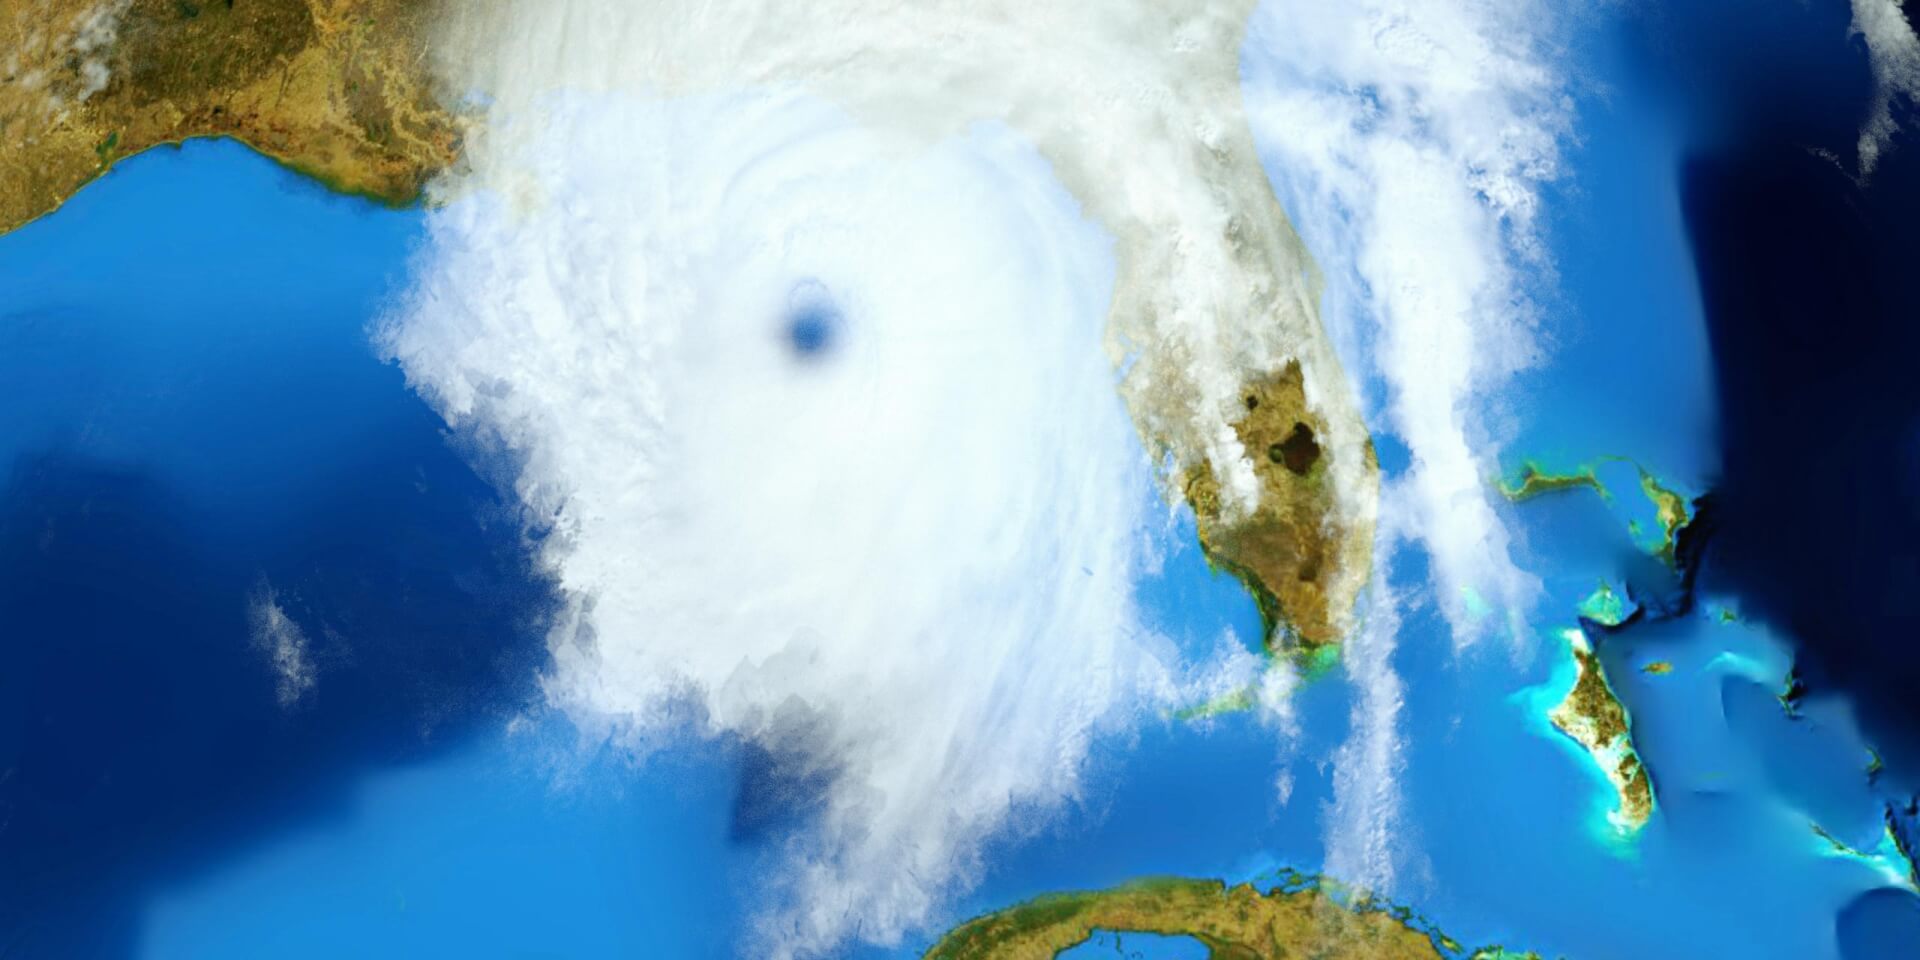 xtremely detailed and realistic high resolution 3D illustration of a Hurricane.